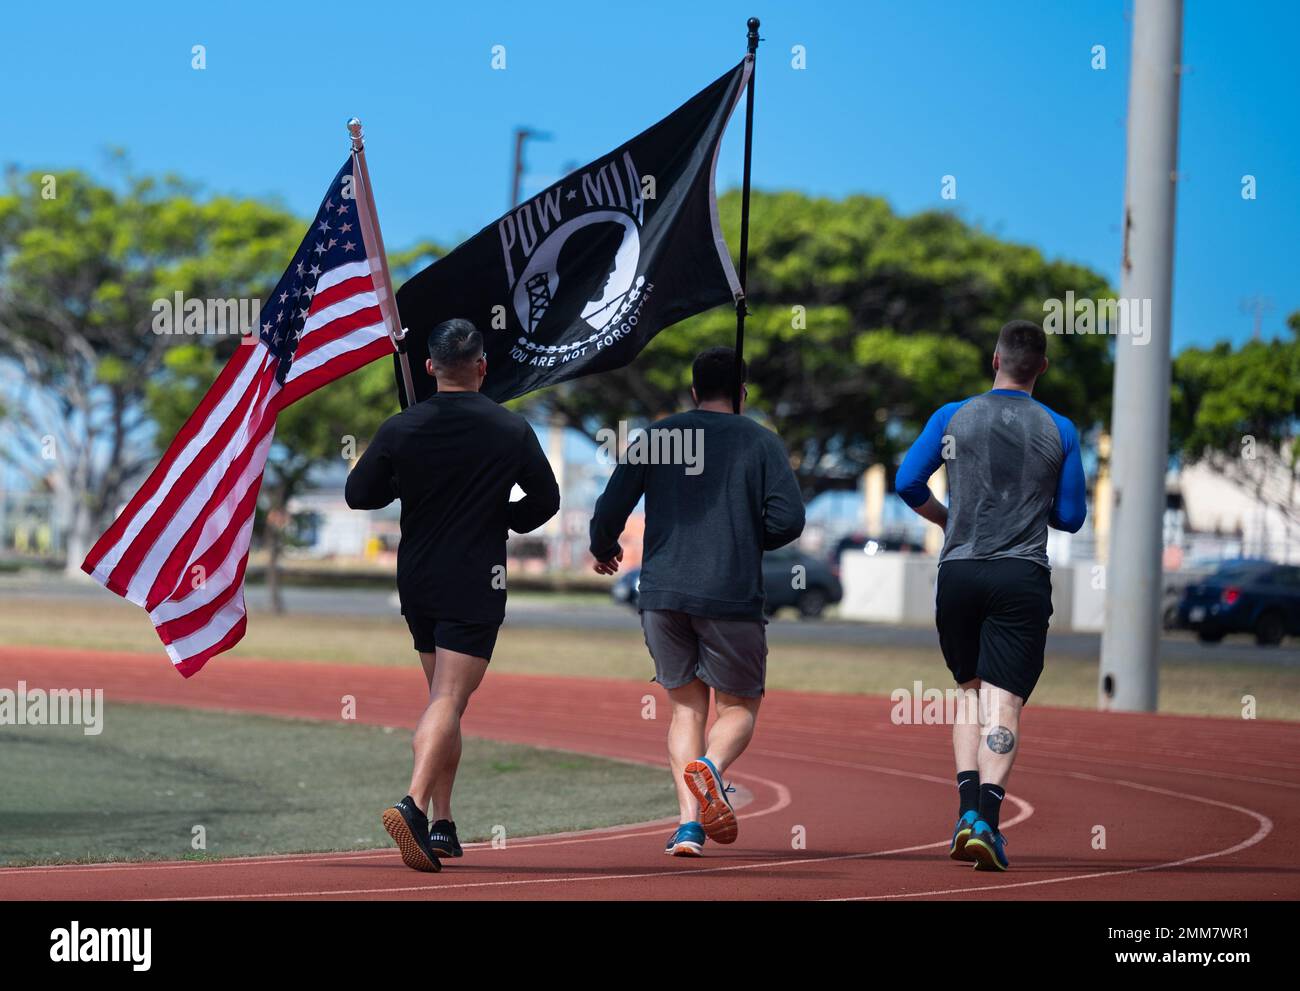 Airmen assigned to Joint Base Pearl Harbor-Hickam carry the American and POW/MIA flag in honor of POW/MIA week during a 24-hour run at Earhart Field on JBPHH, Hawaii, Sept. 15, 2022. The official U.S. POW/MIA flag was created through the efforts of POW/MIA family members to make the public aware of their loved ones who were being held prisoner or declared missing during the Vietnam War. Stock Photo